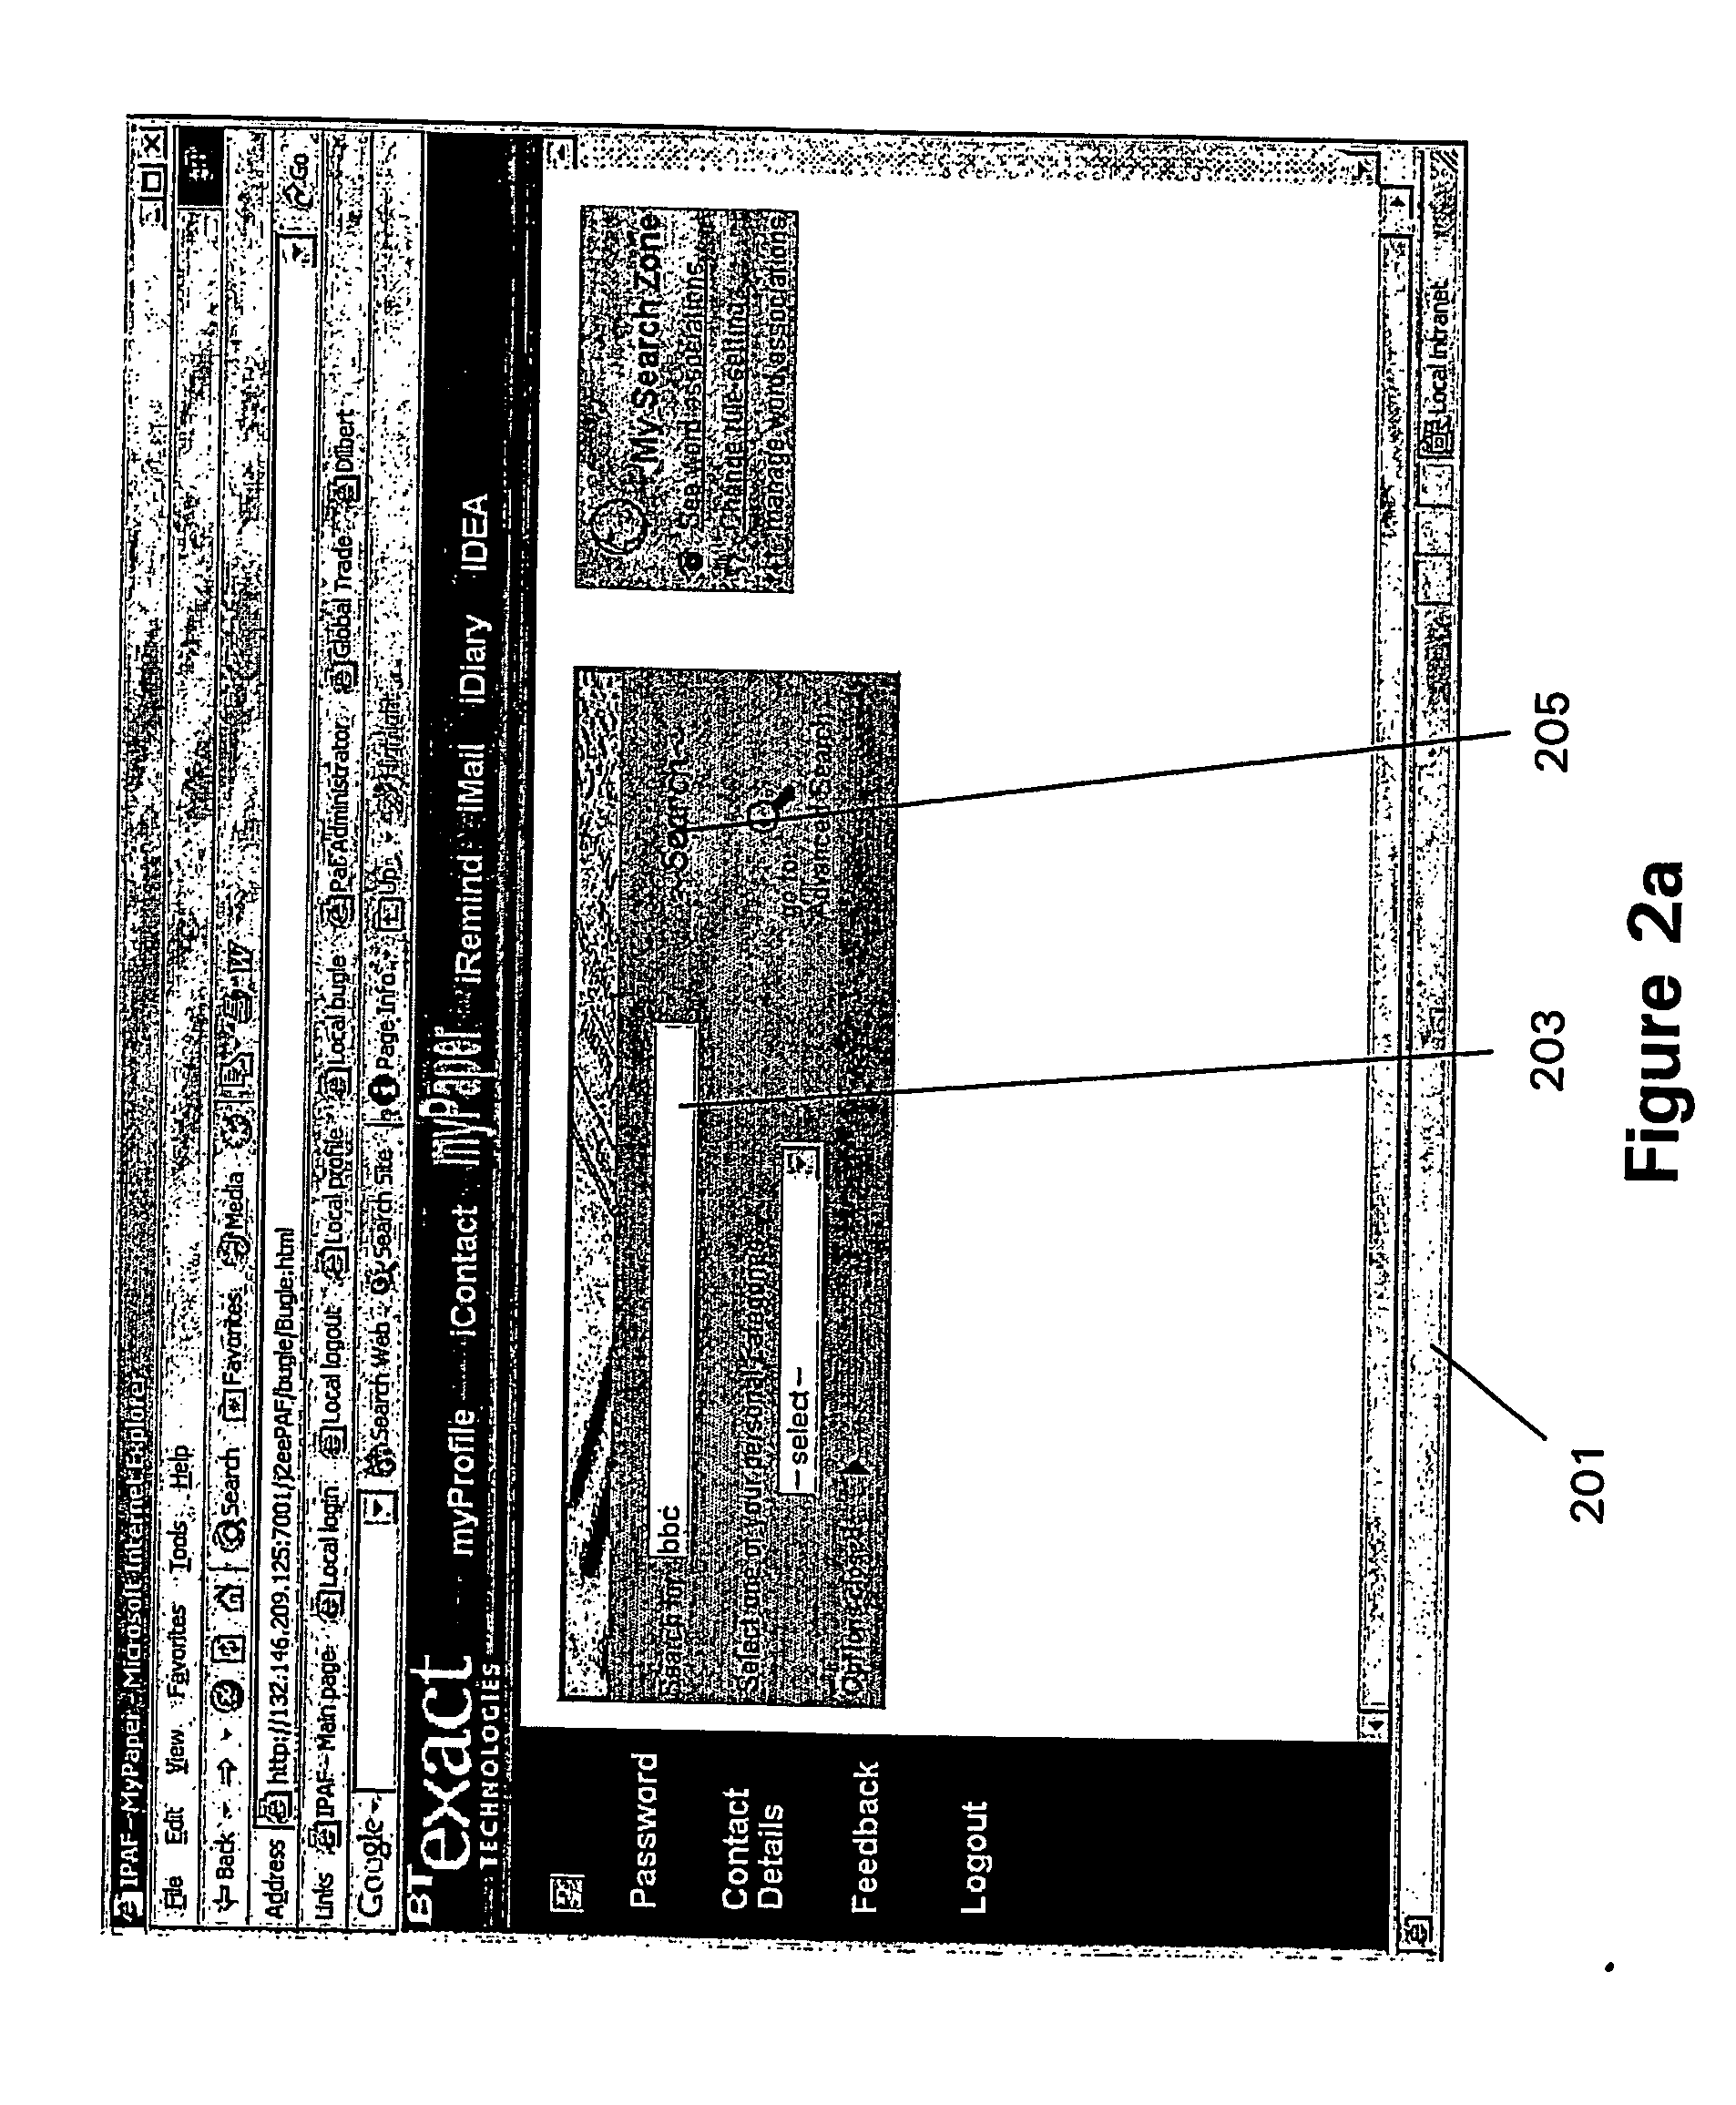 Searching apparatus and methods